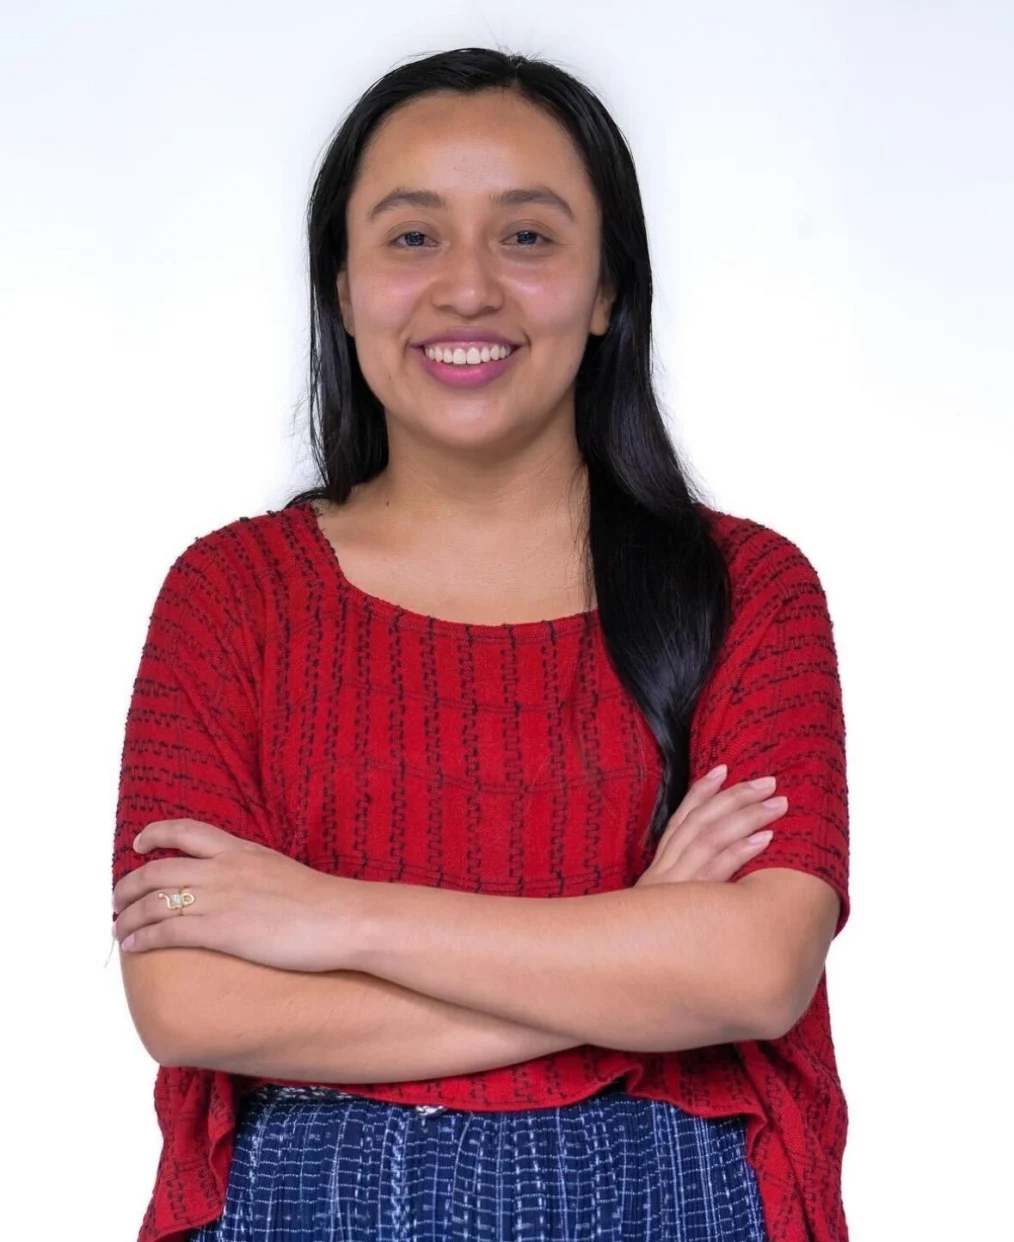 The image is a “cowboy shot” of a woman with a light skin tone and long black hair. She smiles at the camera. Her arms are crossed around her stomach. She is wearing a red indigenous print shirt with black dots and a blue patterned skirt. 